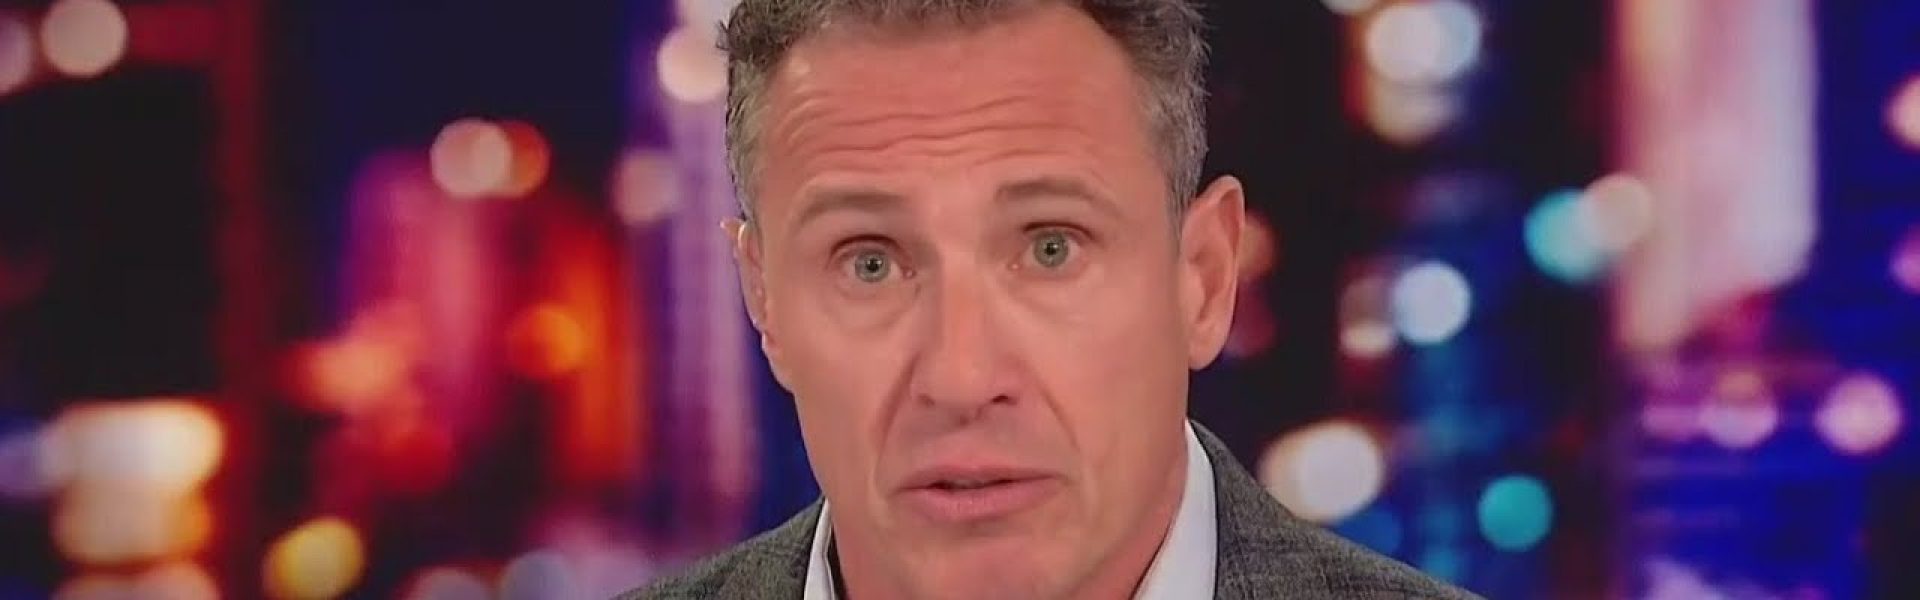 Chris Cuomo: Footage from Oct. 7 attack on Israel shows ‘Hamas wanted war’